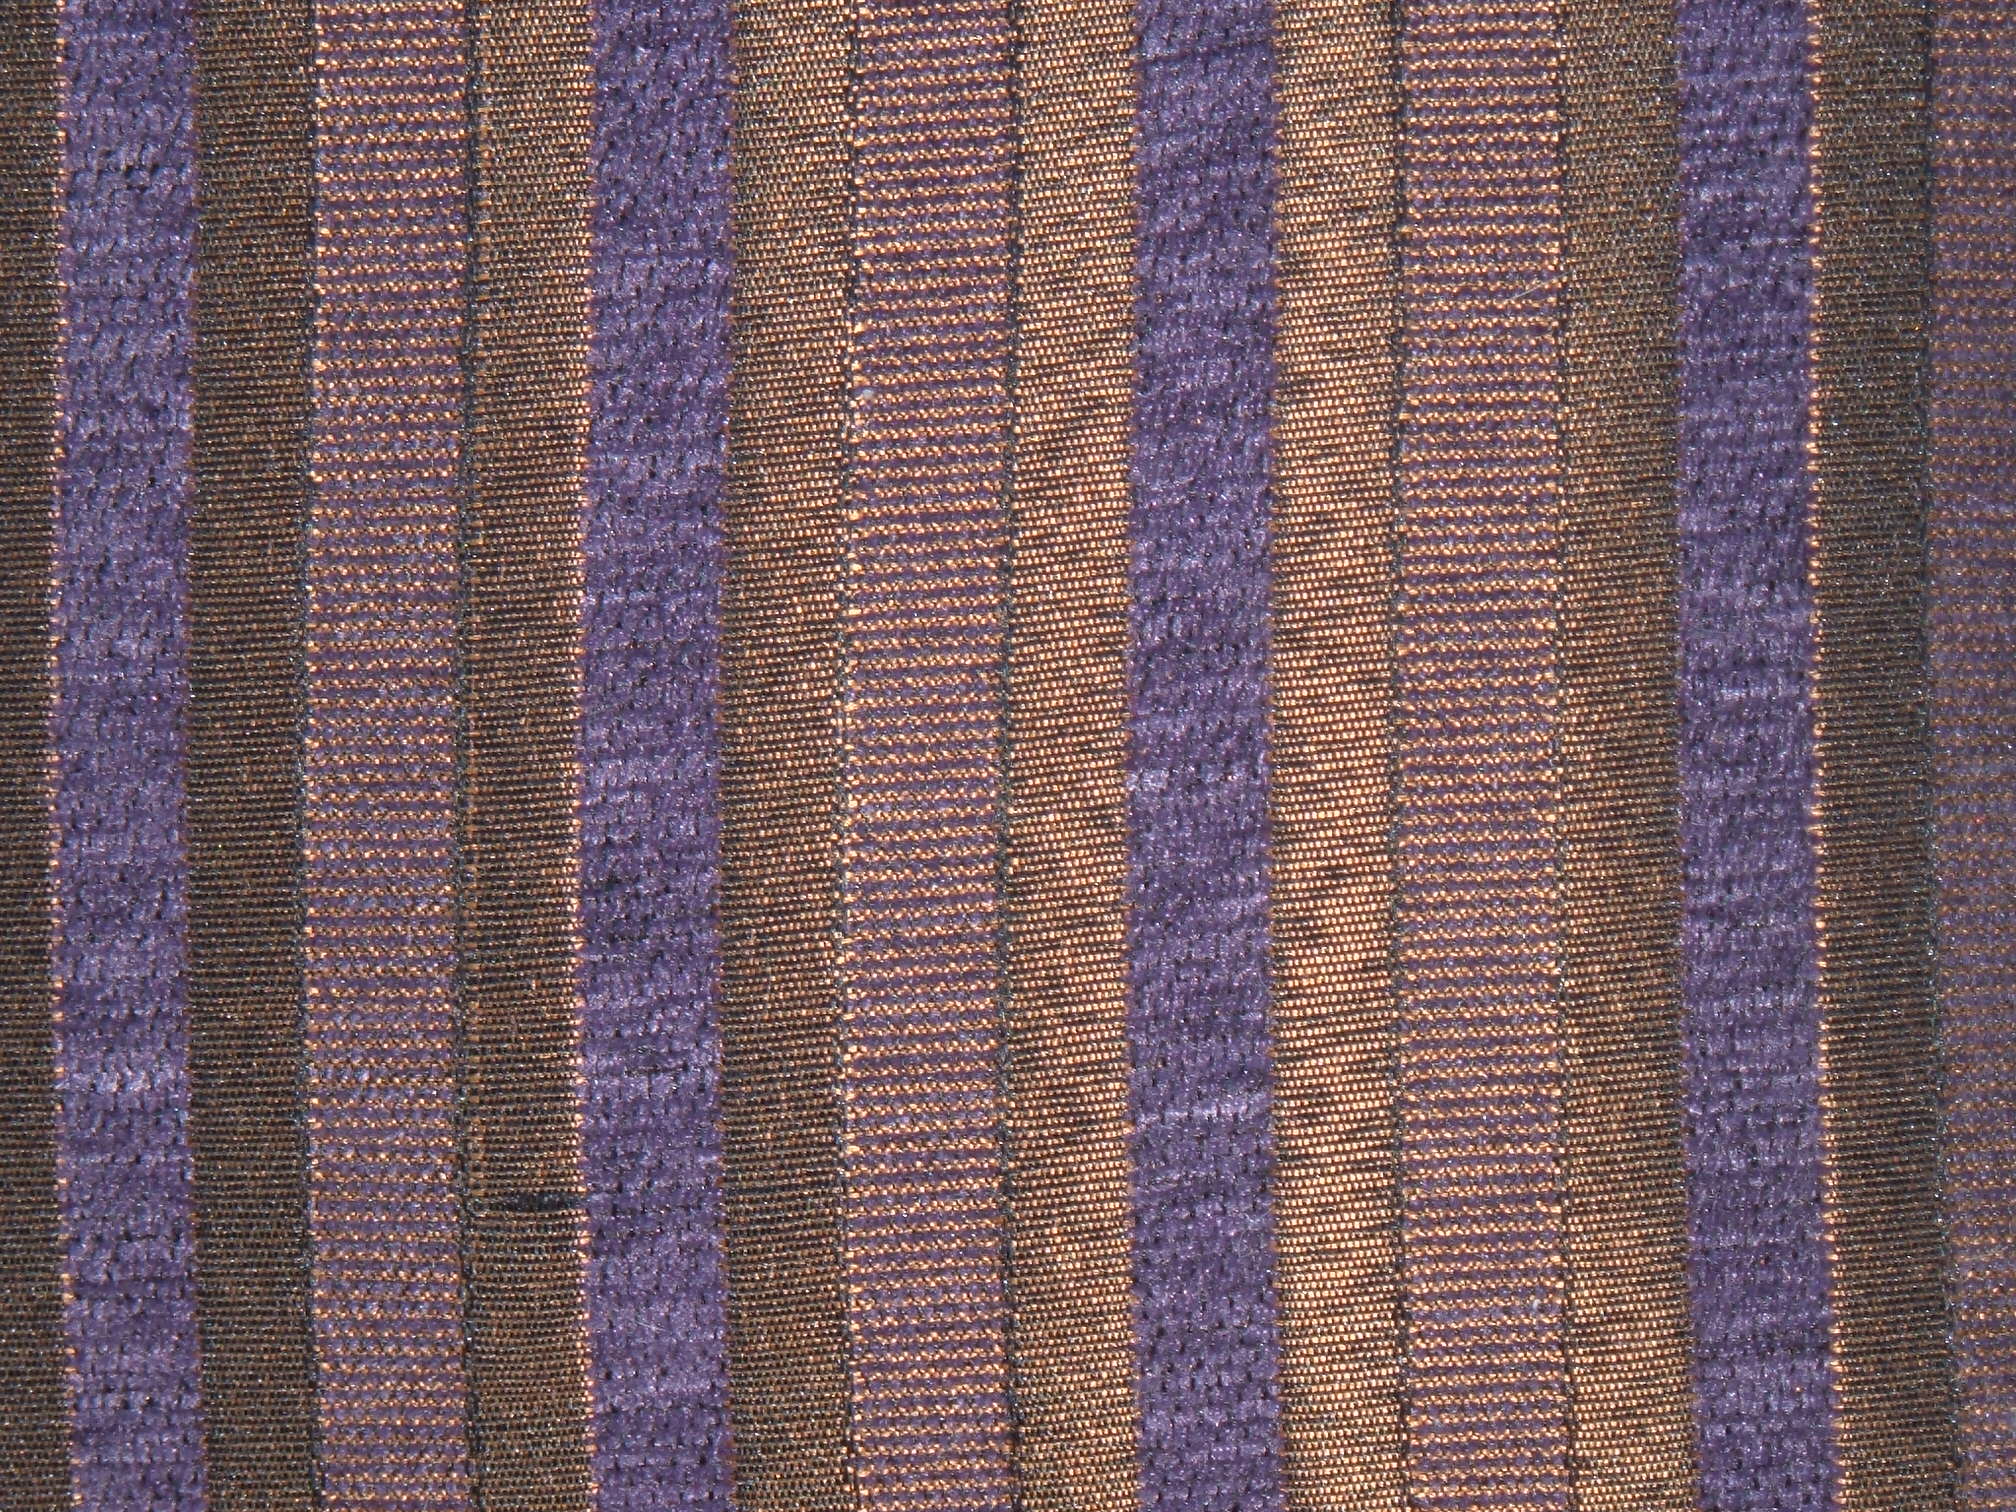 a close up s of a brown and purple striped curtain